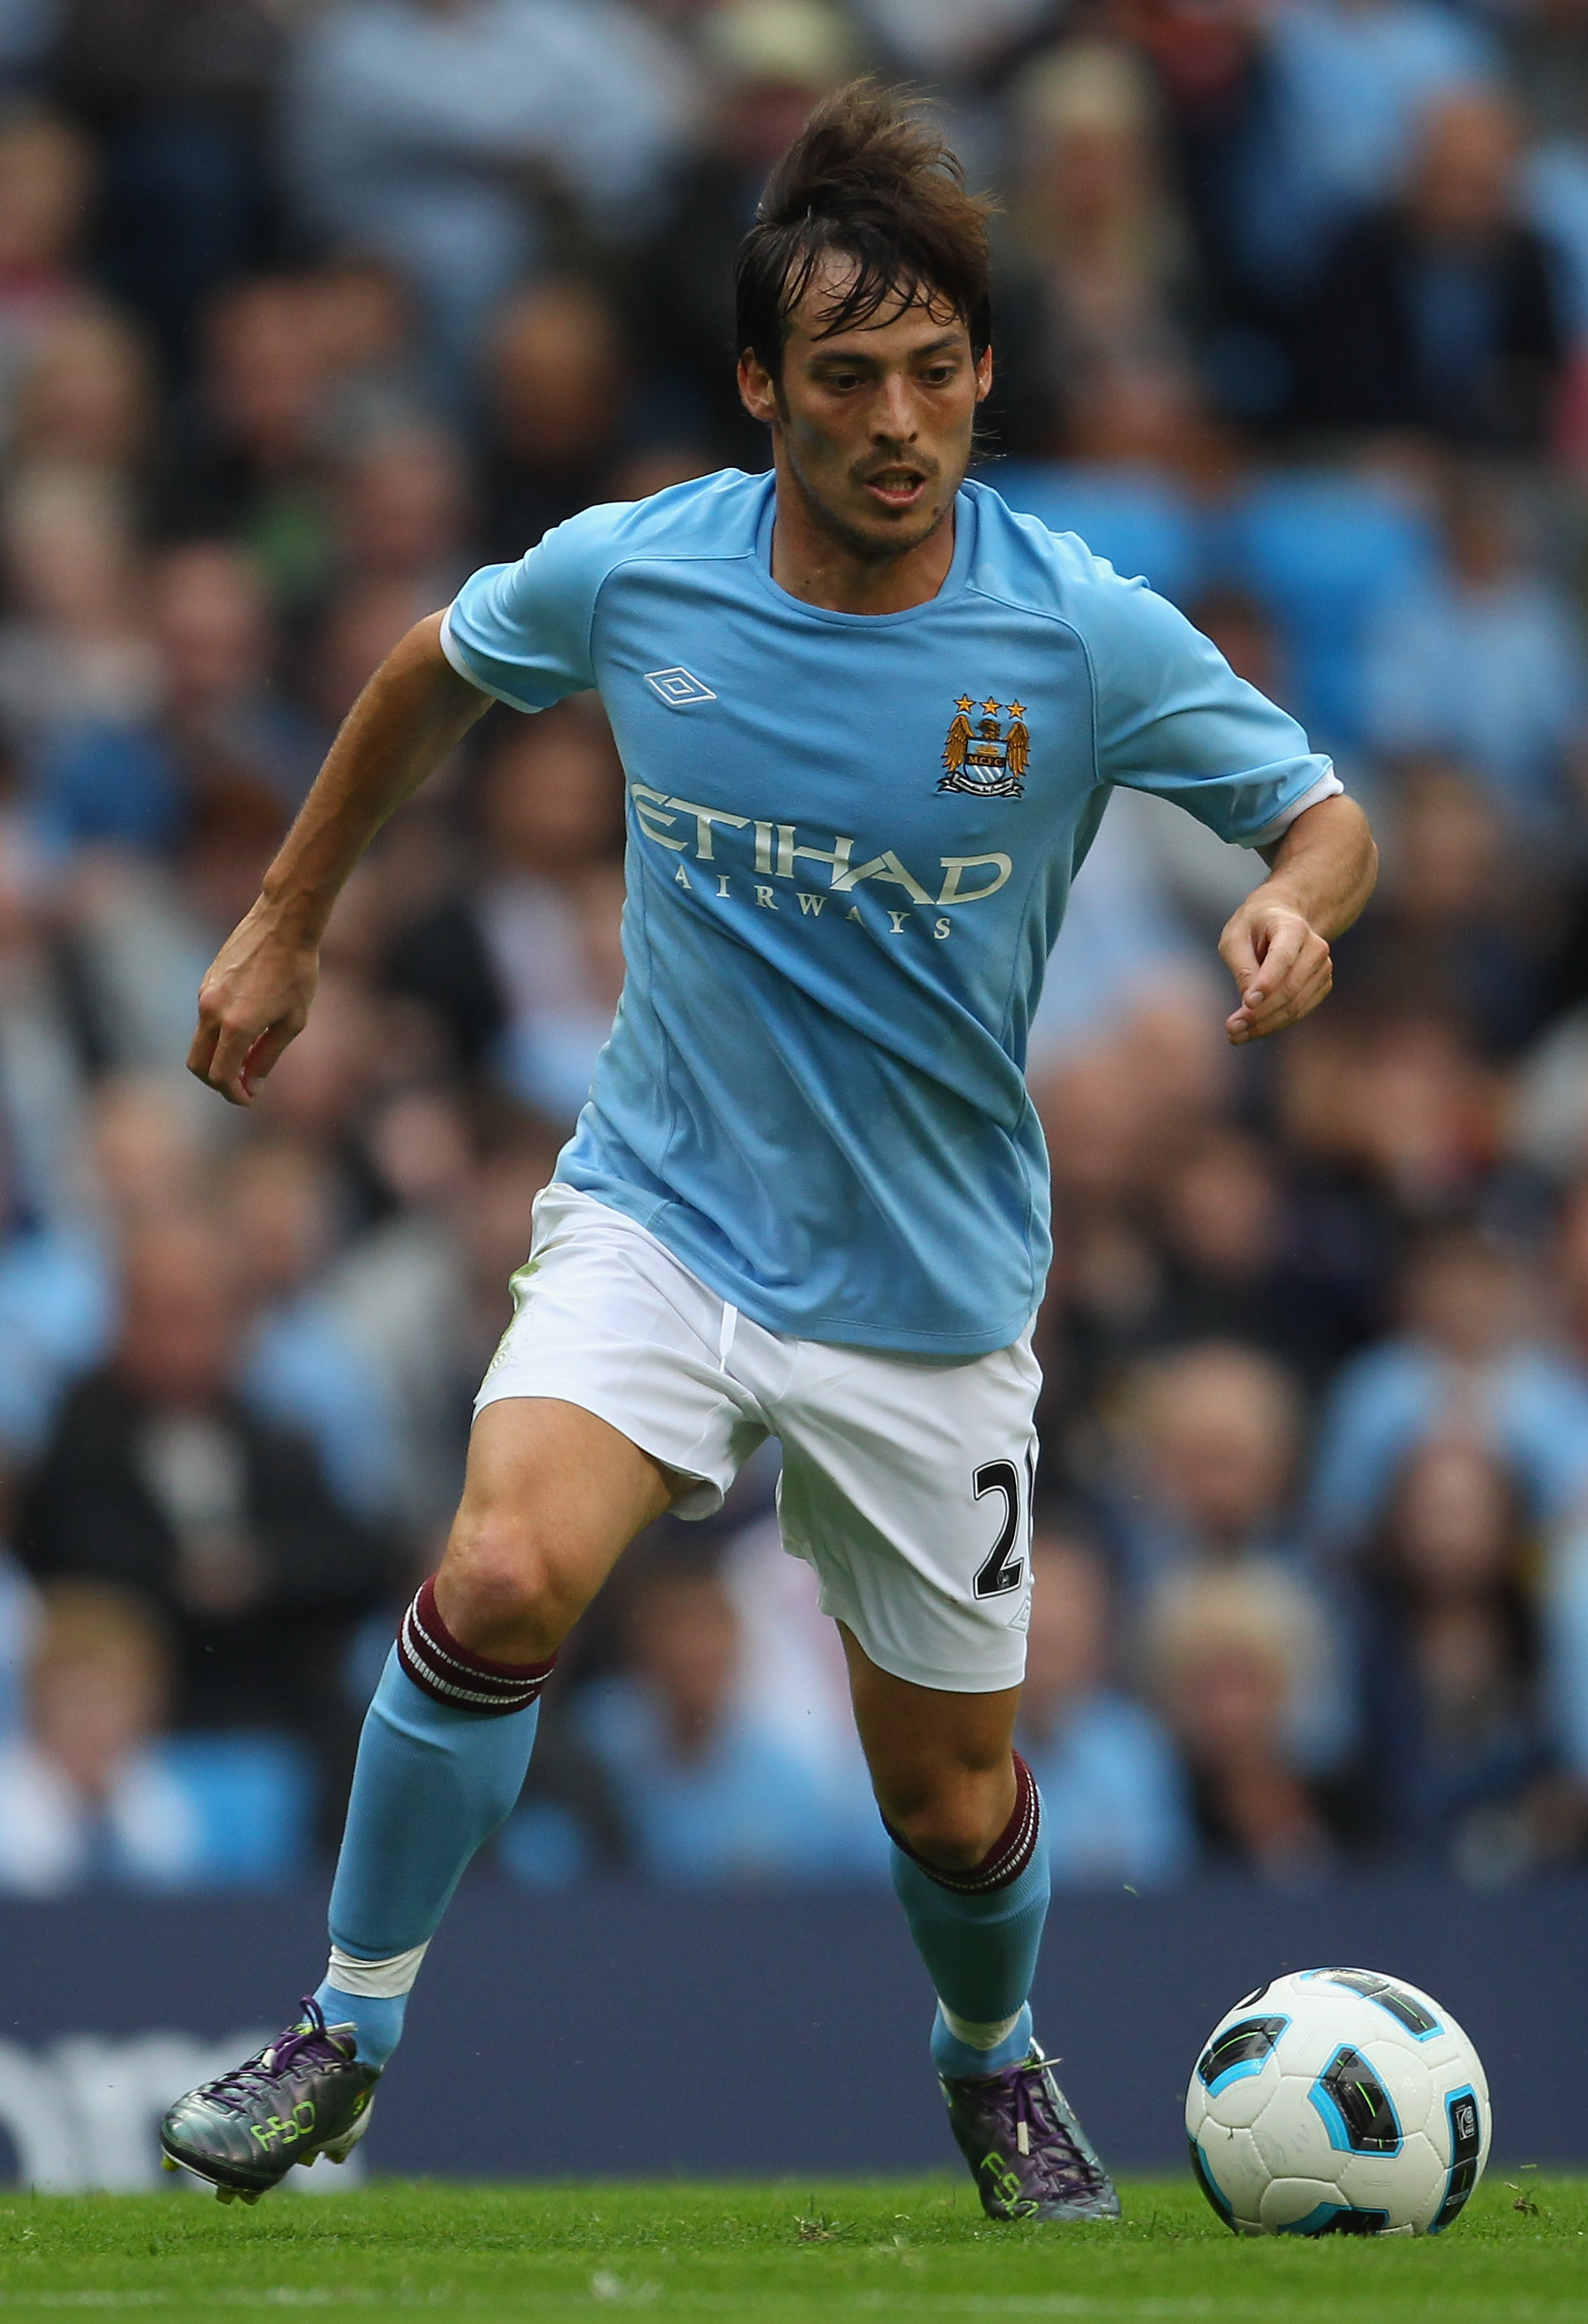 MANCHESTER, ENGLAND - AUGUST 07:  David Silva of Manchester City during the pre-season friendly match between Manchester City and Valencia at the City of Manchester Stadium on August 7, 2010 in Manchester, England.  (Photo by Alex Livesey/Getty Images)